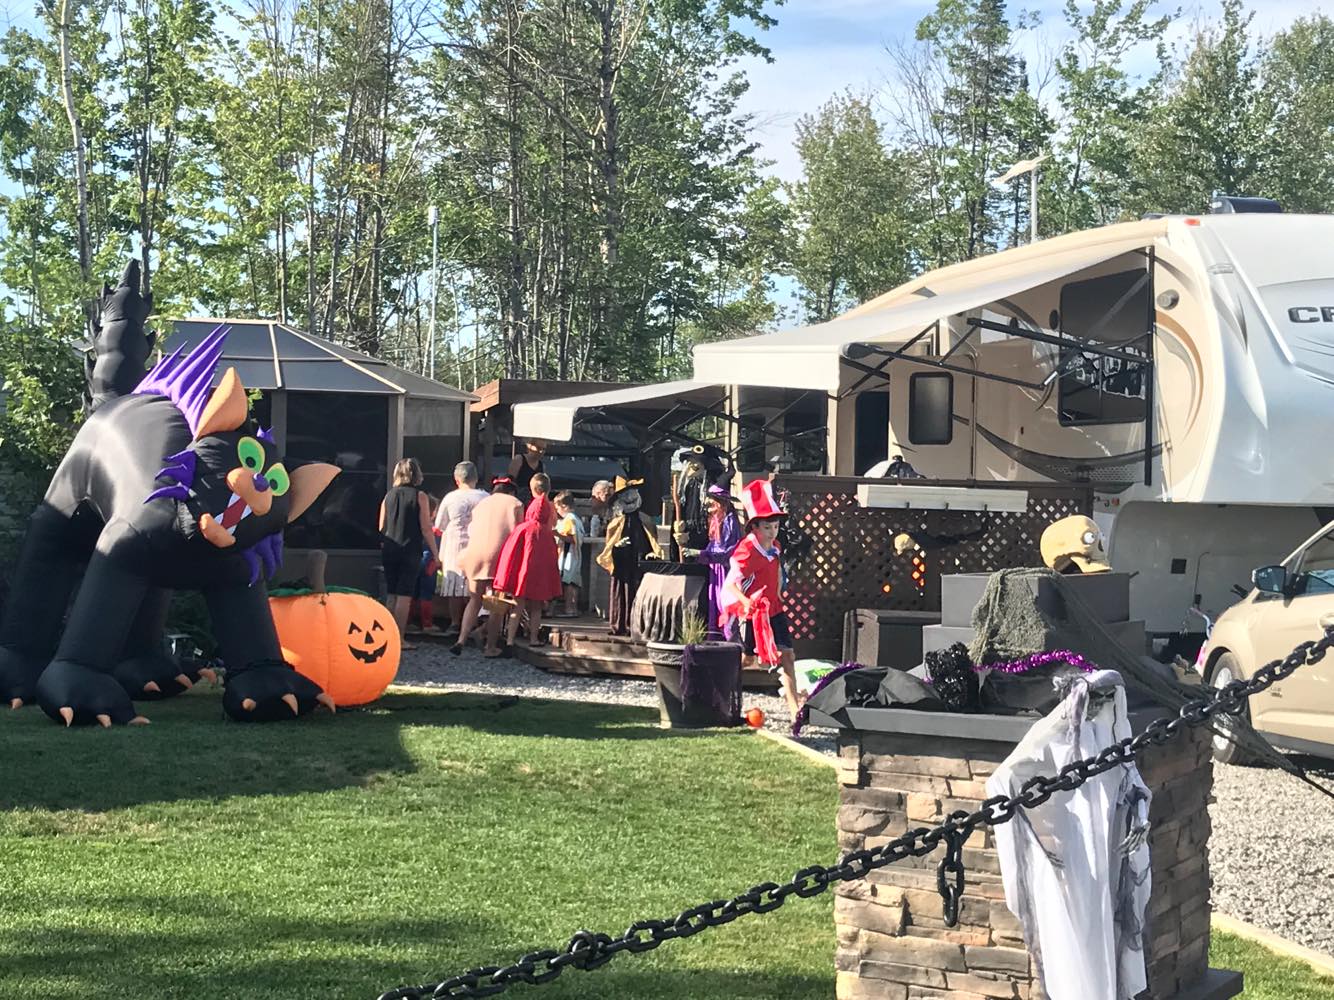 http://www.familycampgrounds.ca/wp-content/uploads/2018/08/halloween-complexe-atlantide-2018-26.jpg